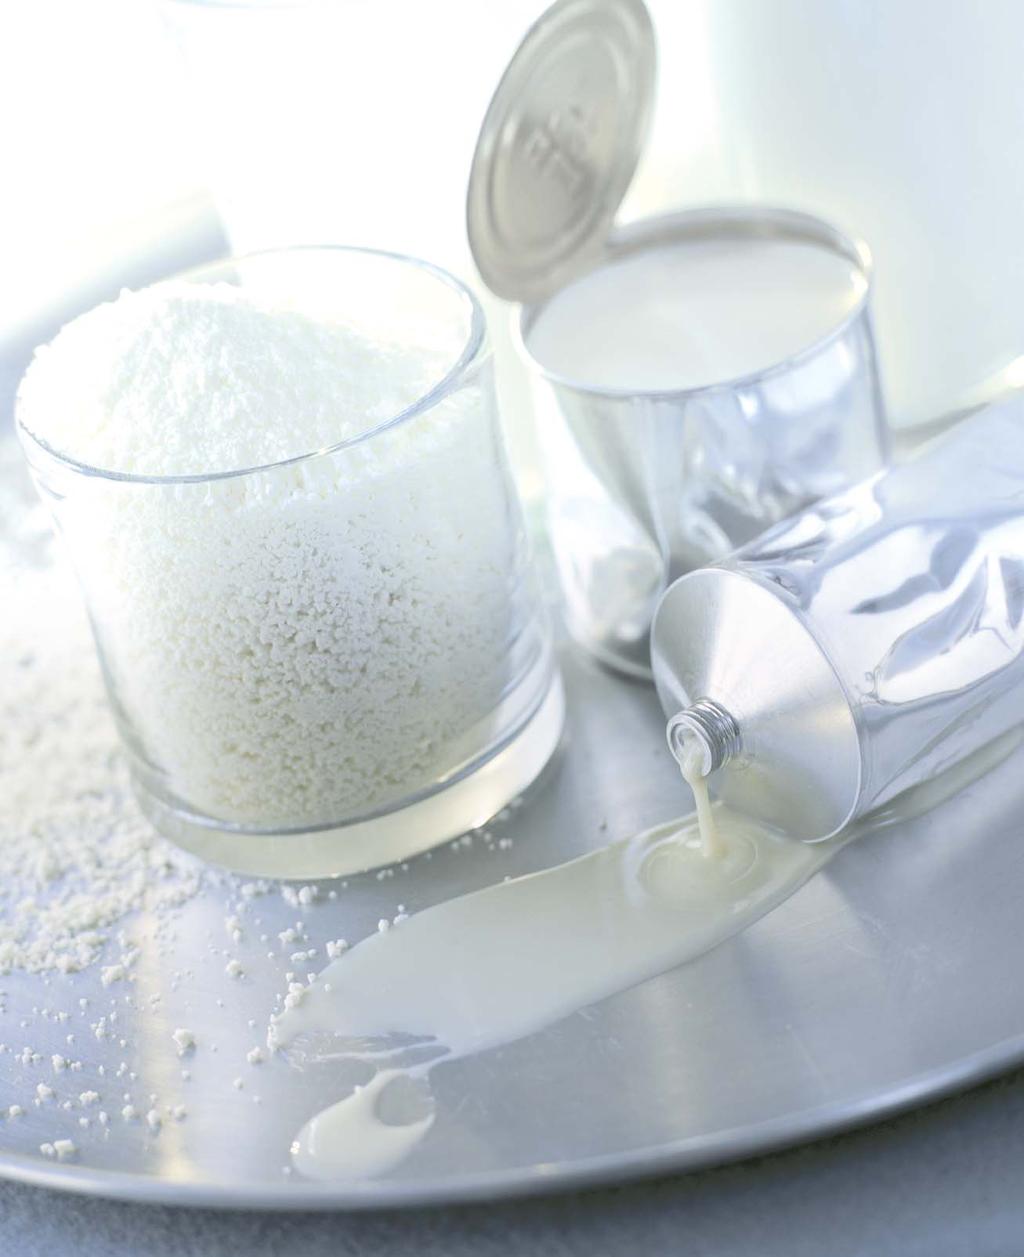 Hygiene makes the difference Casein and lactose are two important milk by-products with